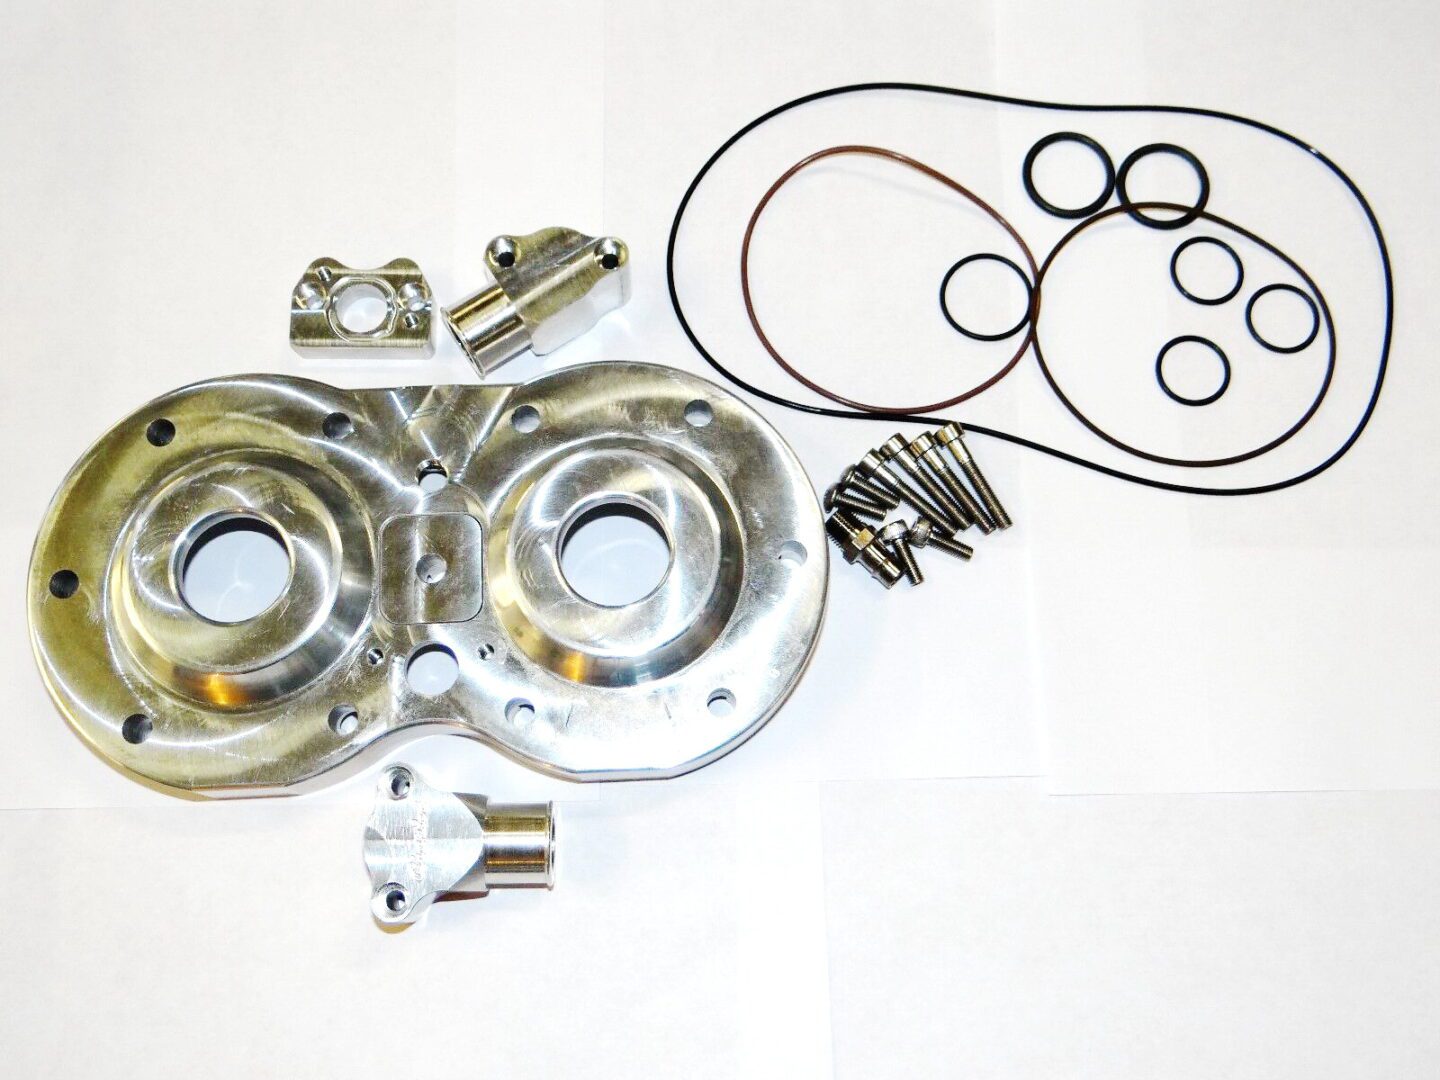 A set of gaskets and seals on a white surface, featuring the DM/Cheetah billet head Chariot, Part# 21-5832.